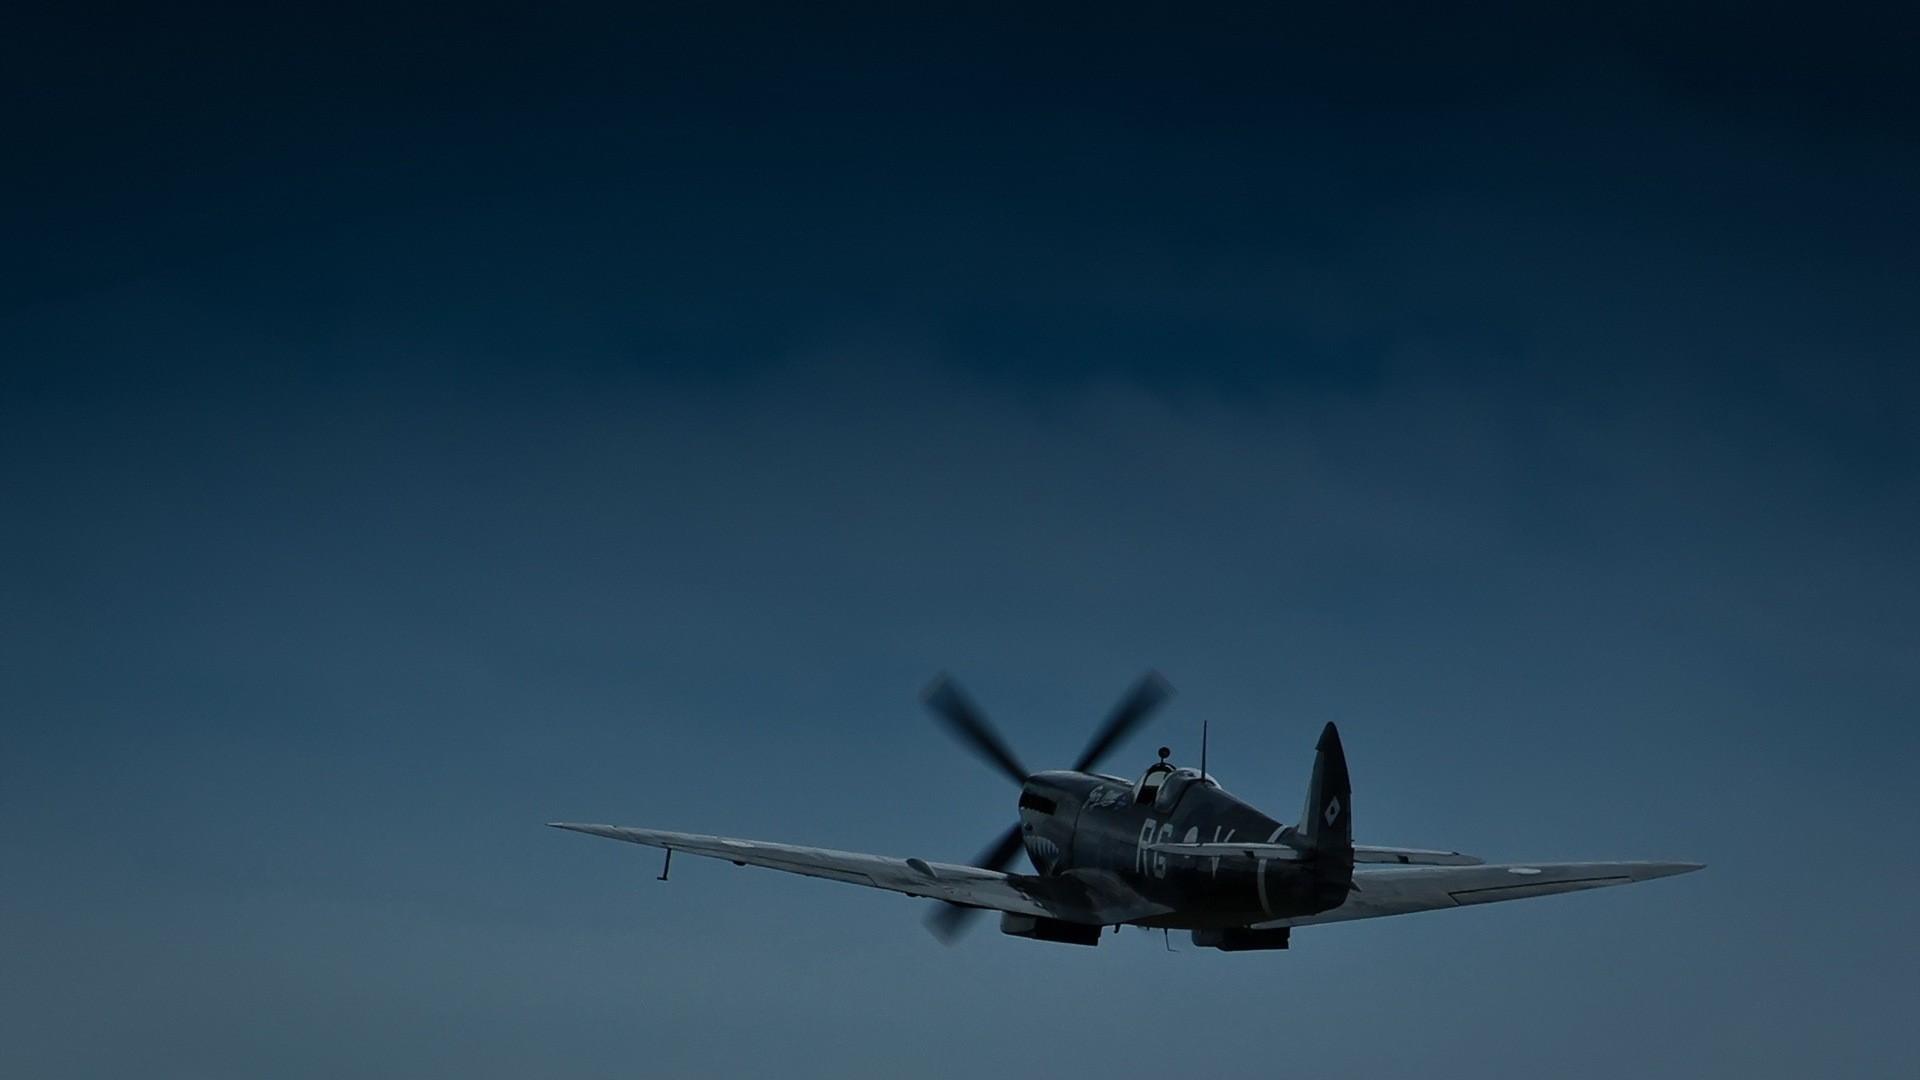  aviation supermarine spitfire twilight time of day wallpaper